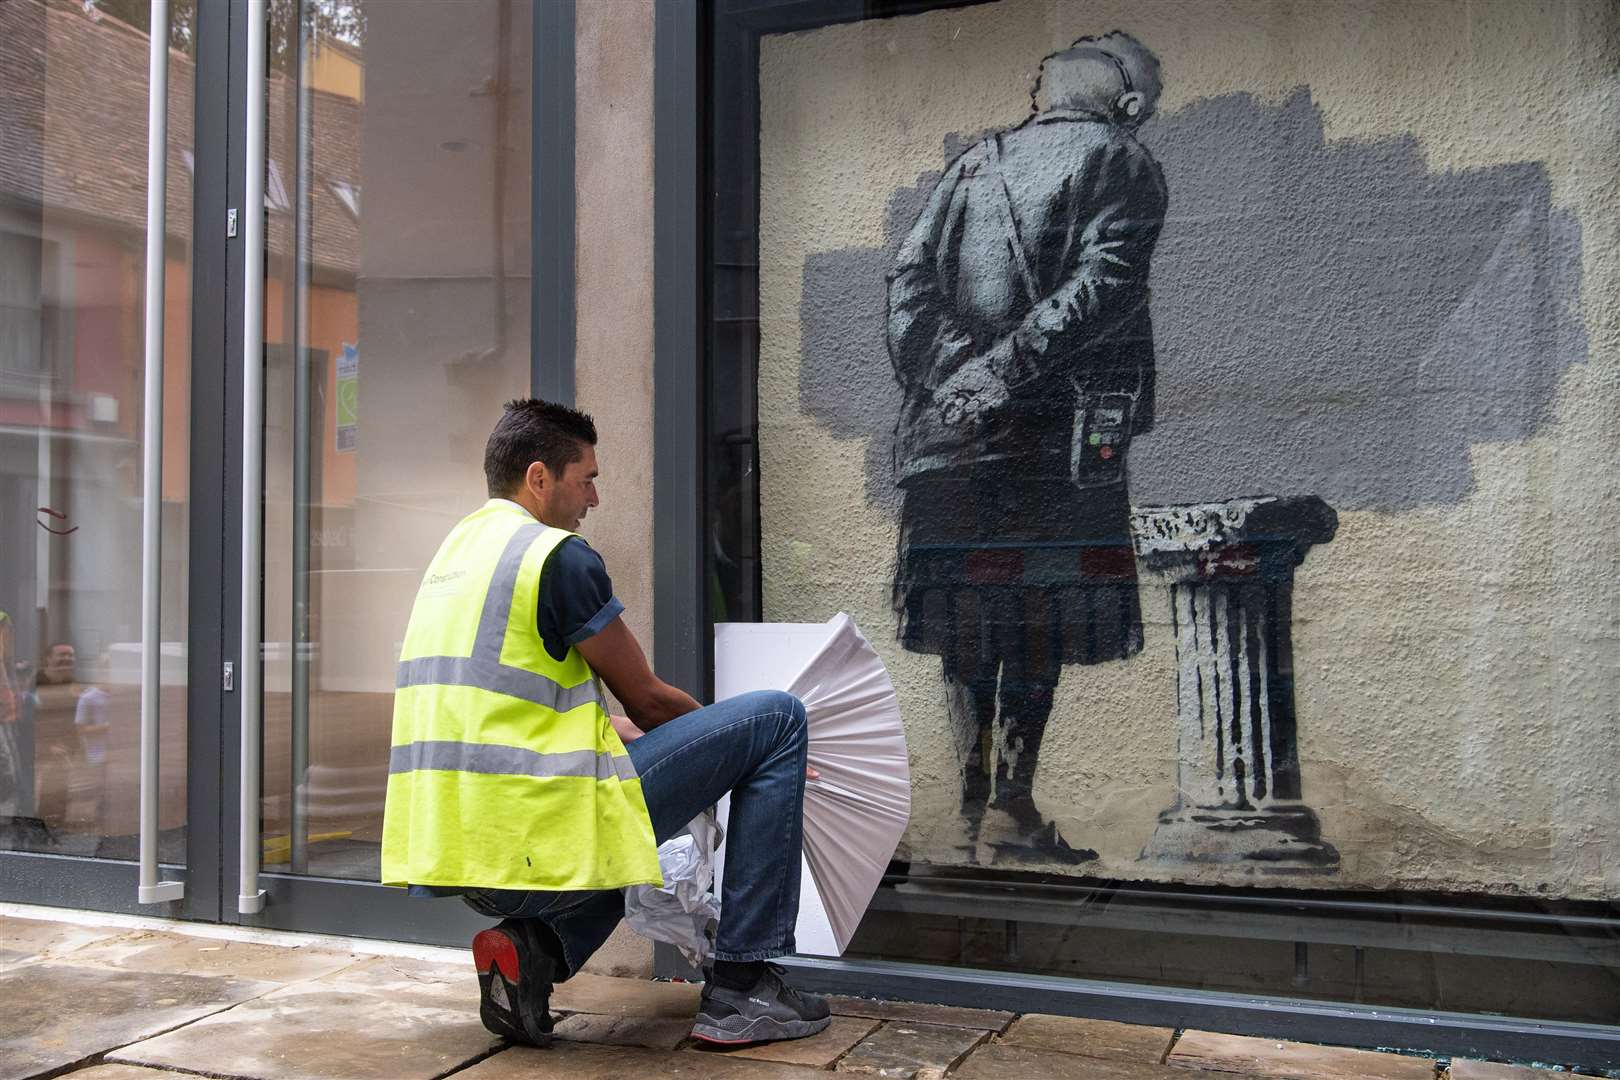 Art Buff, by street artist Banksy, has been re-installed in Folkestone, and is now in the Old High Street. Photo credit: Matt Crossick/PA Wire